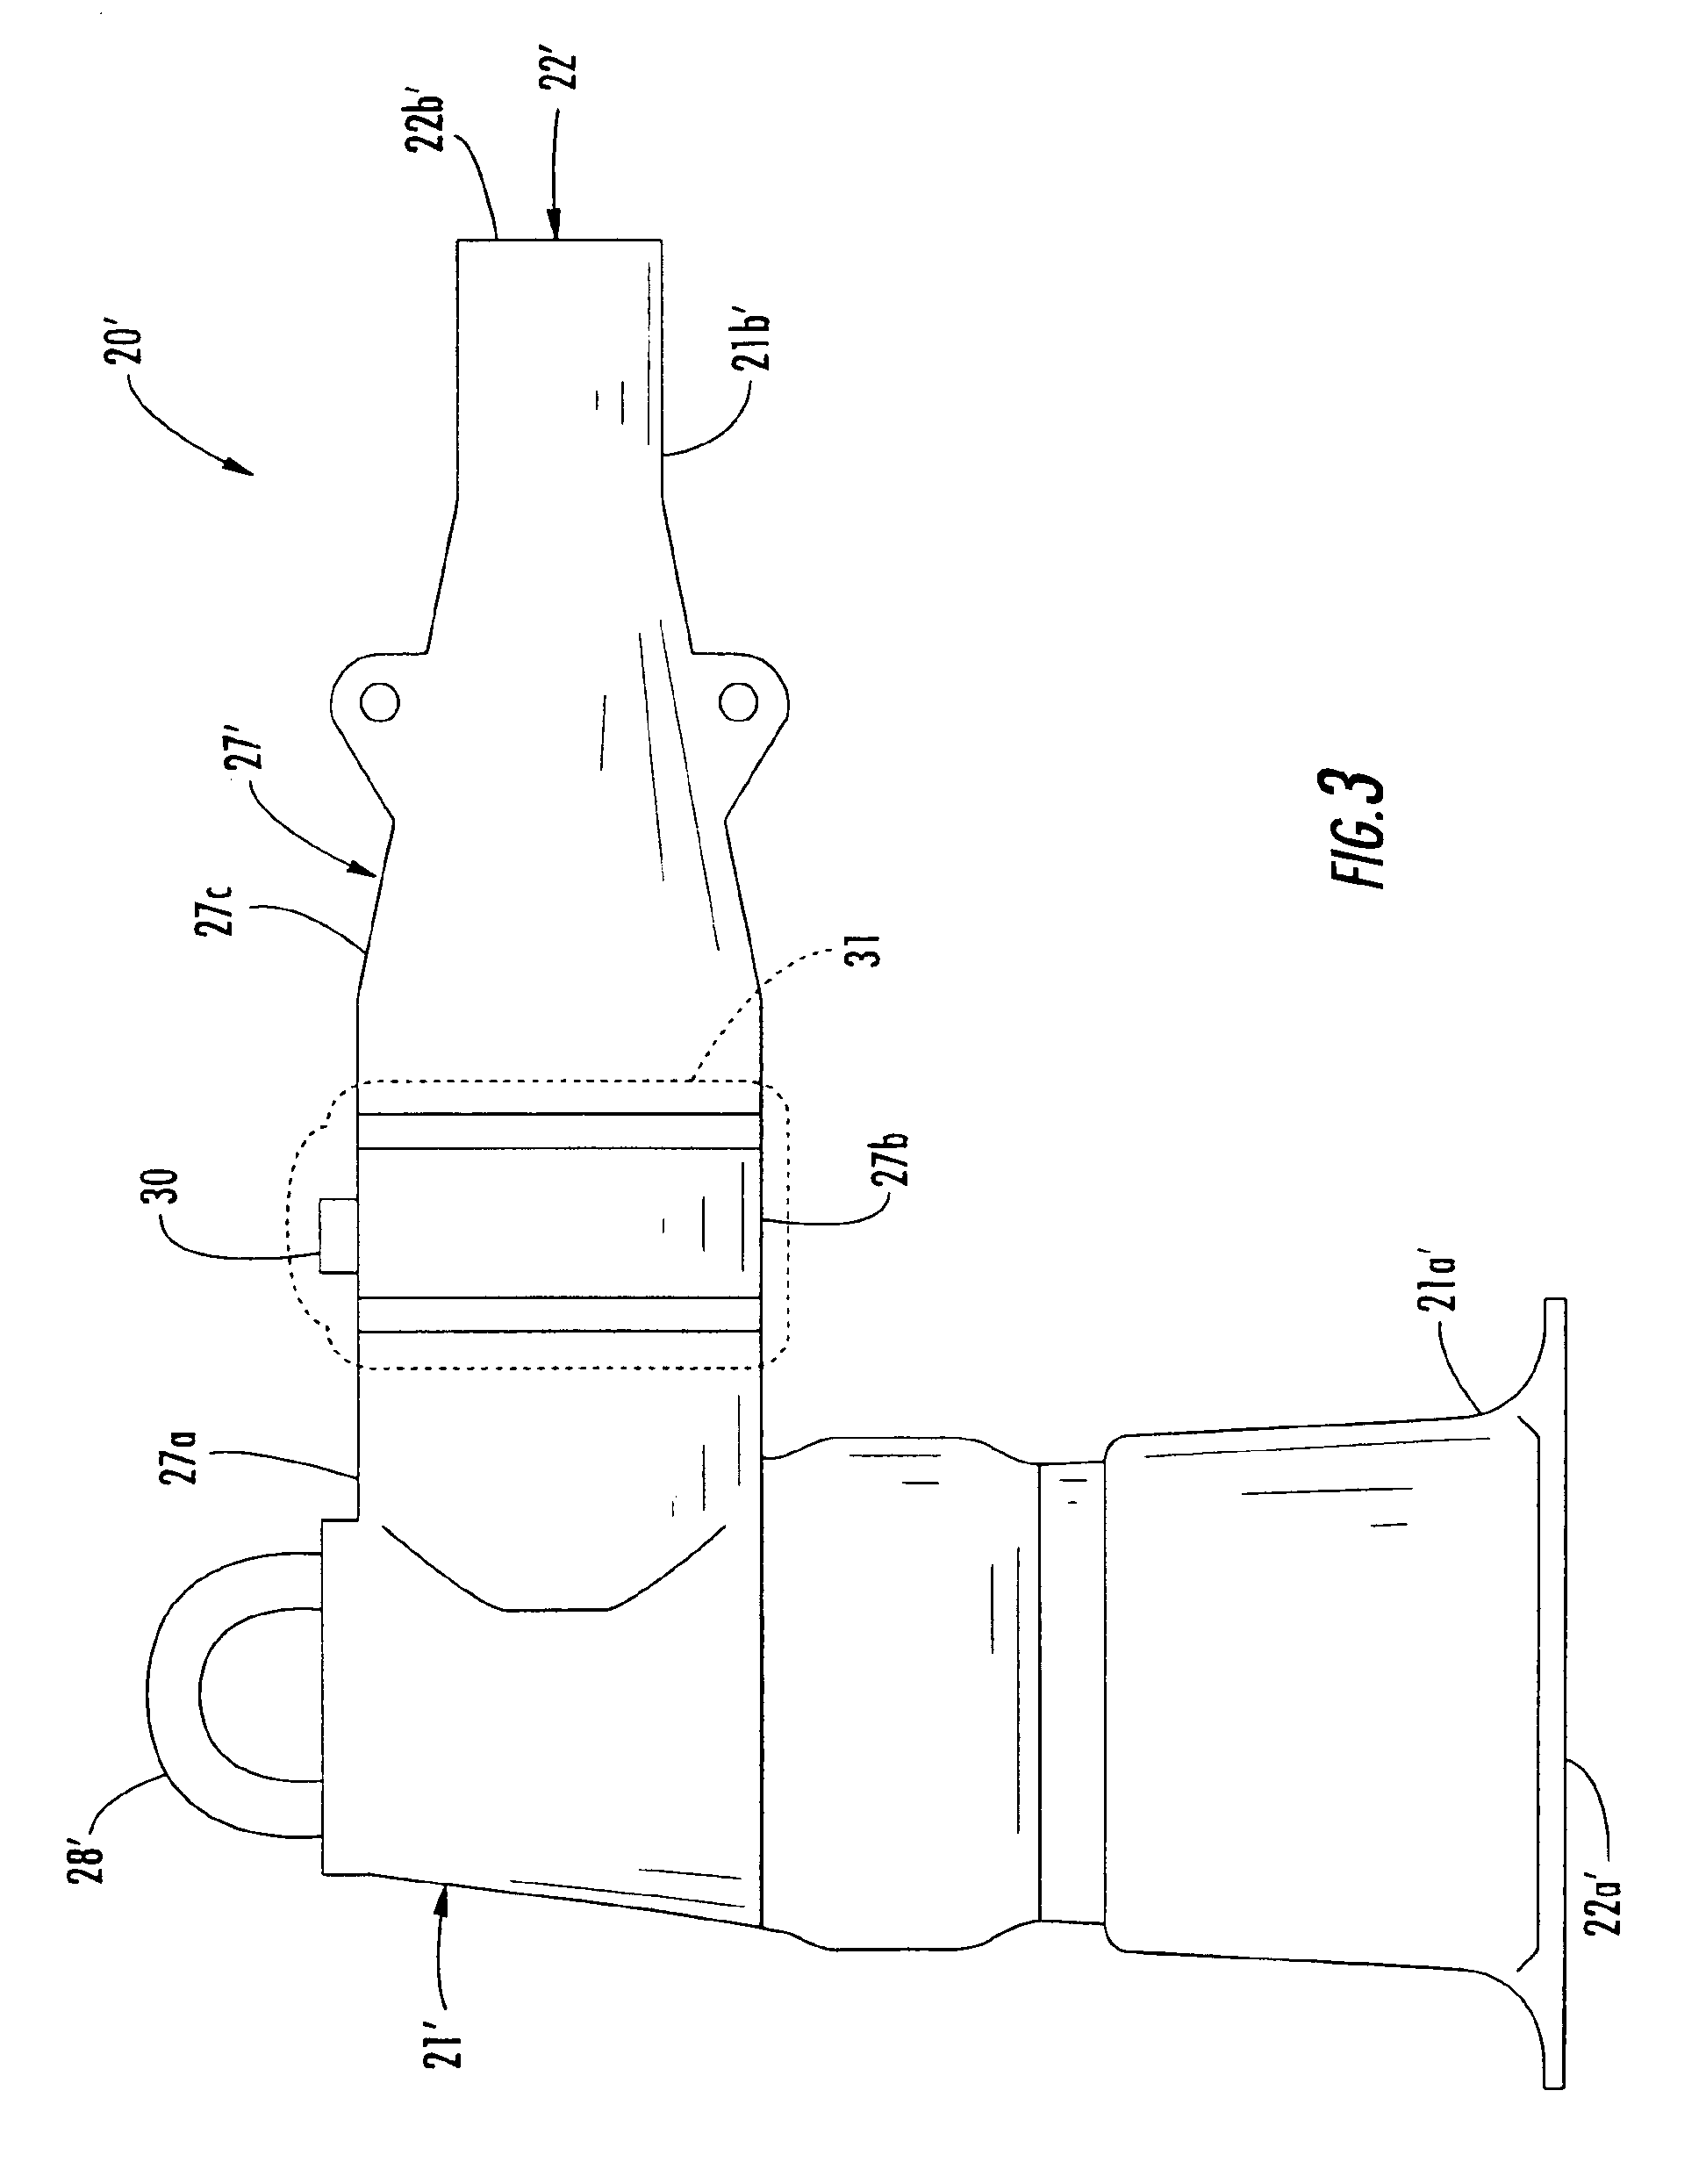 Electrical connector including thermoplastic elastomer material and associated methods